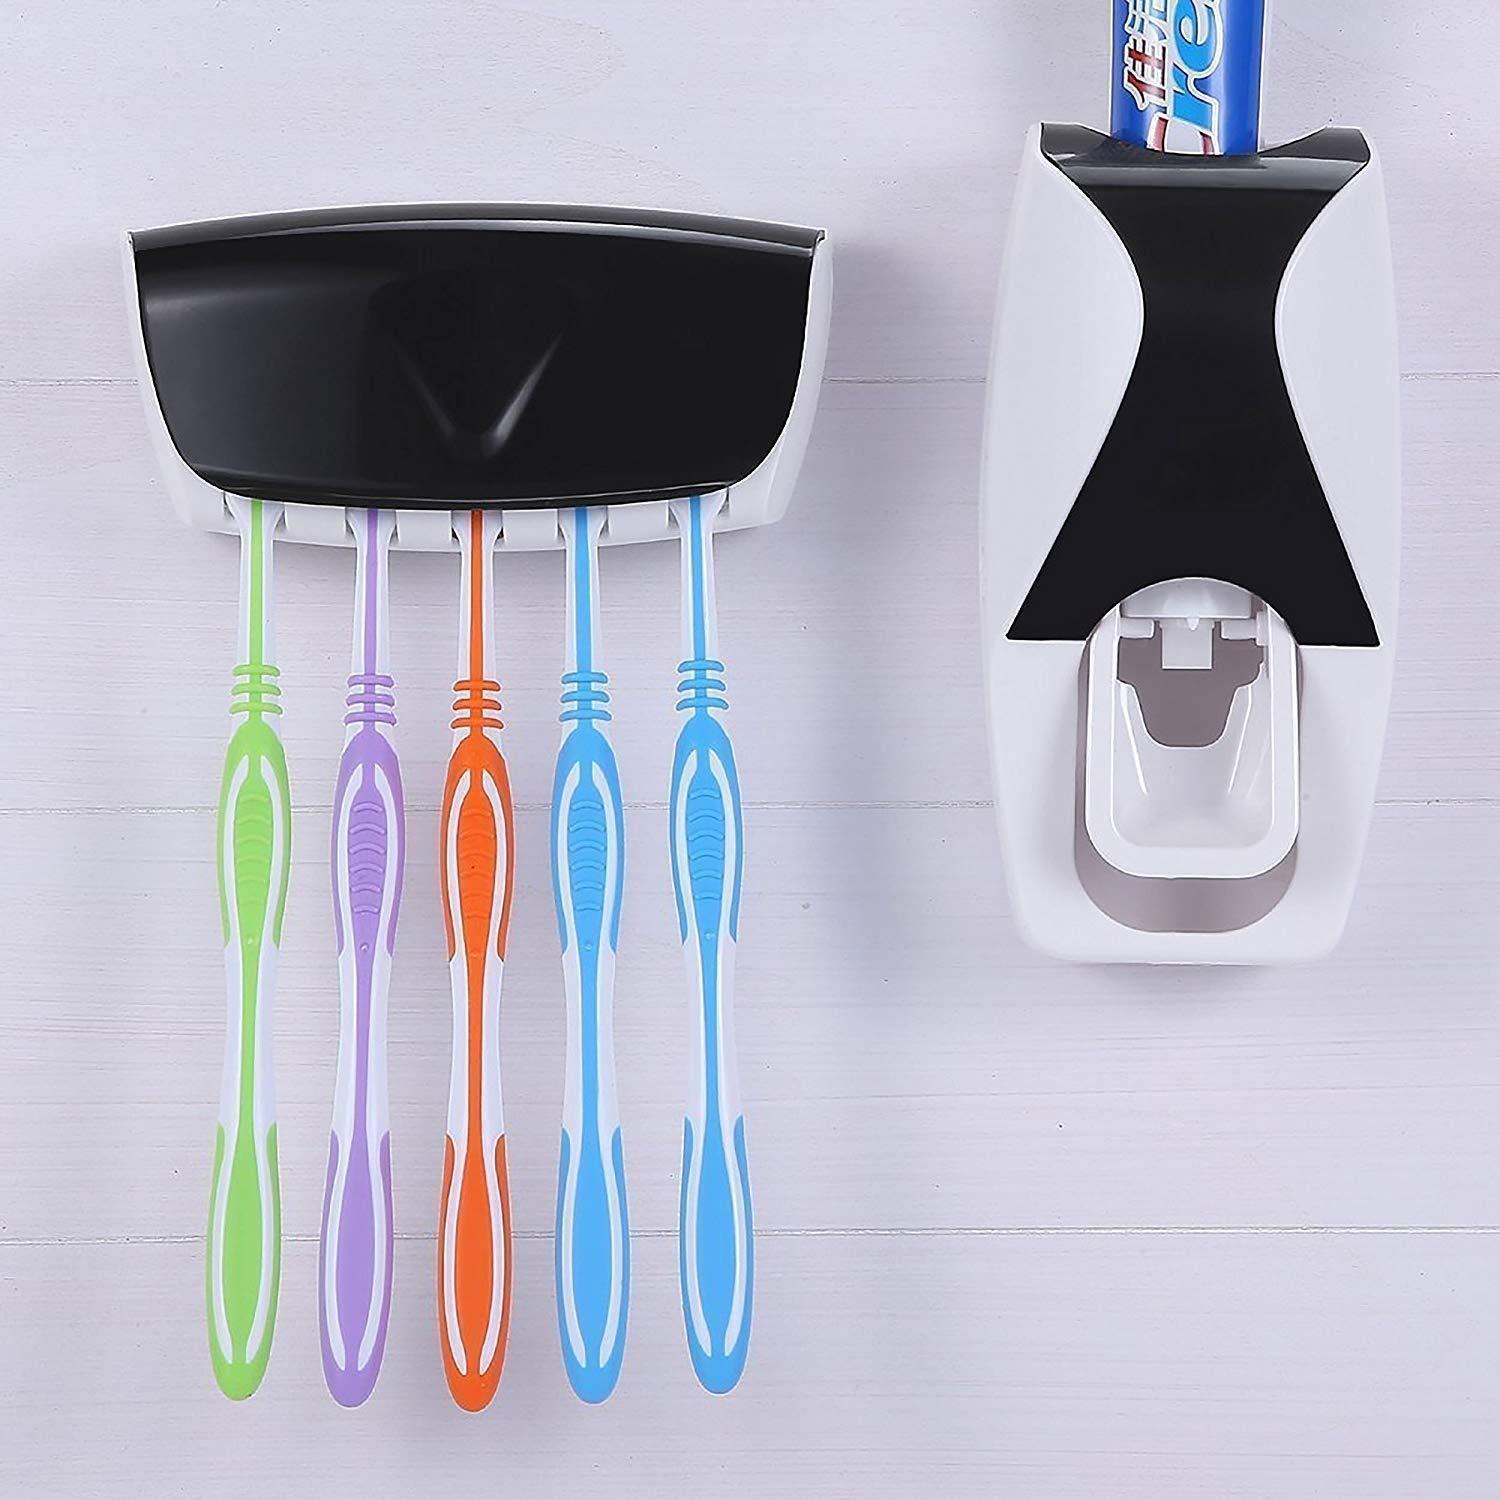 Toothpaste Dispenser & Tooth Brush with Toothbrush - CDesk Dropship